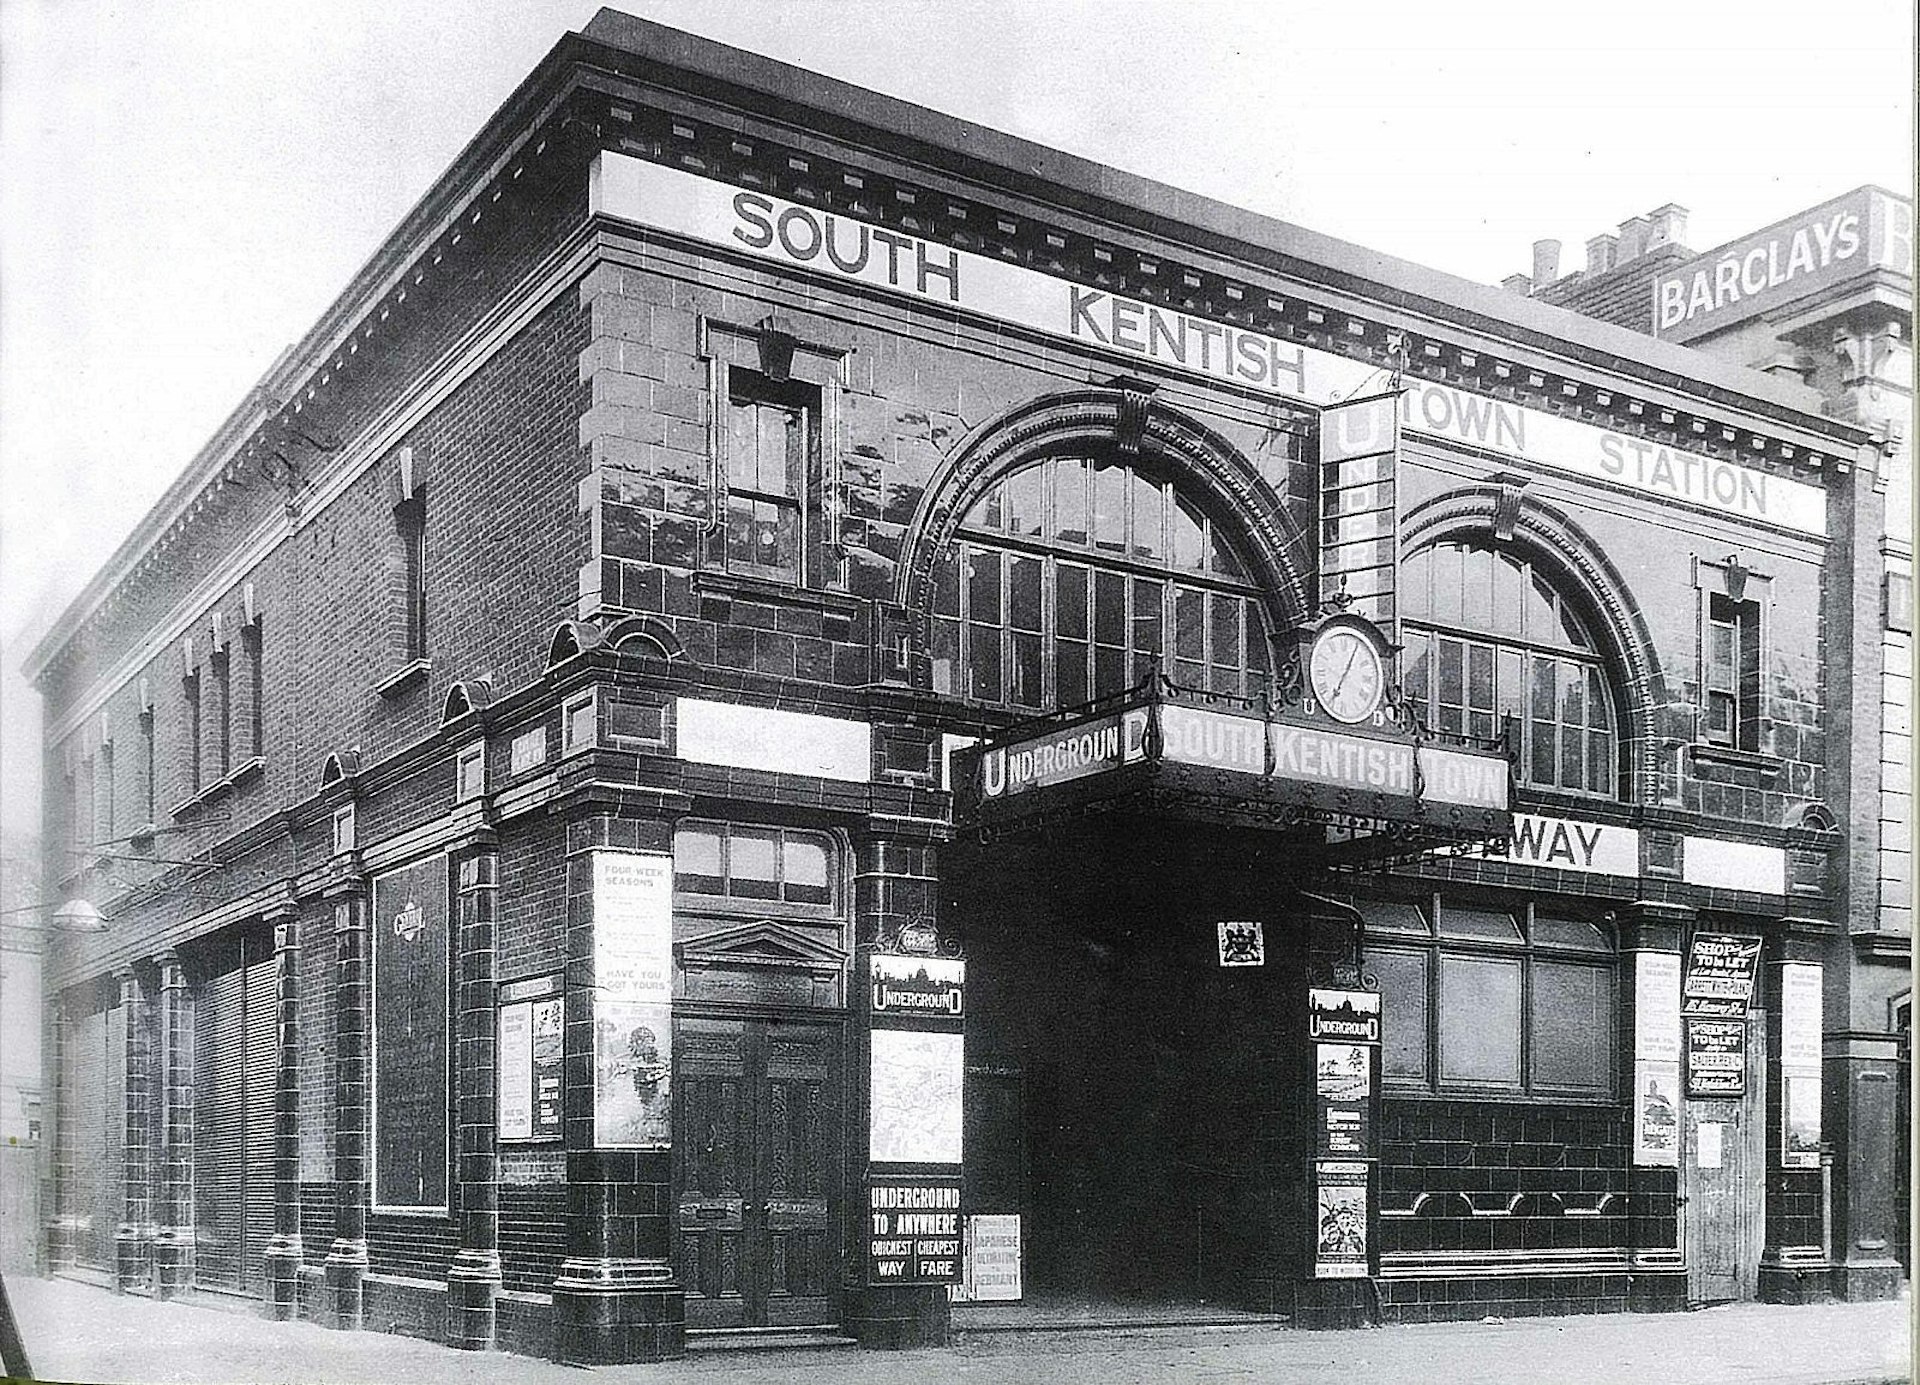 An ageing black and white photo of South Kentish Town tube station exterior; the building is made of bricks with a tiled facade and arched windows over the entrance.